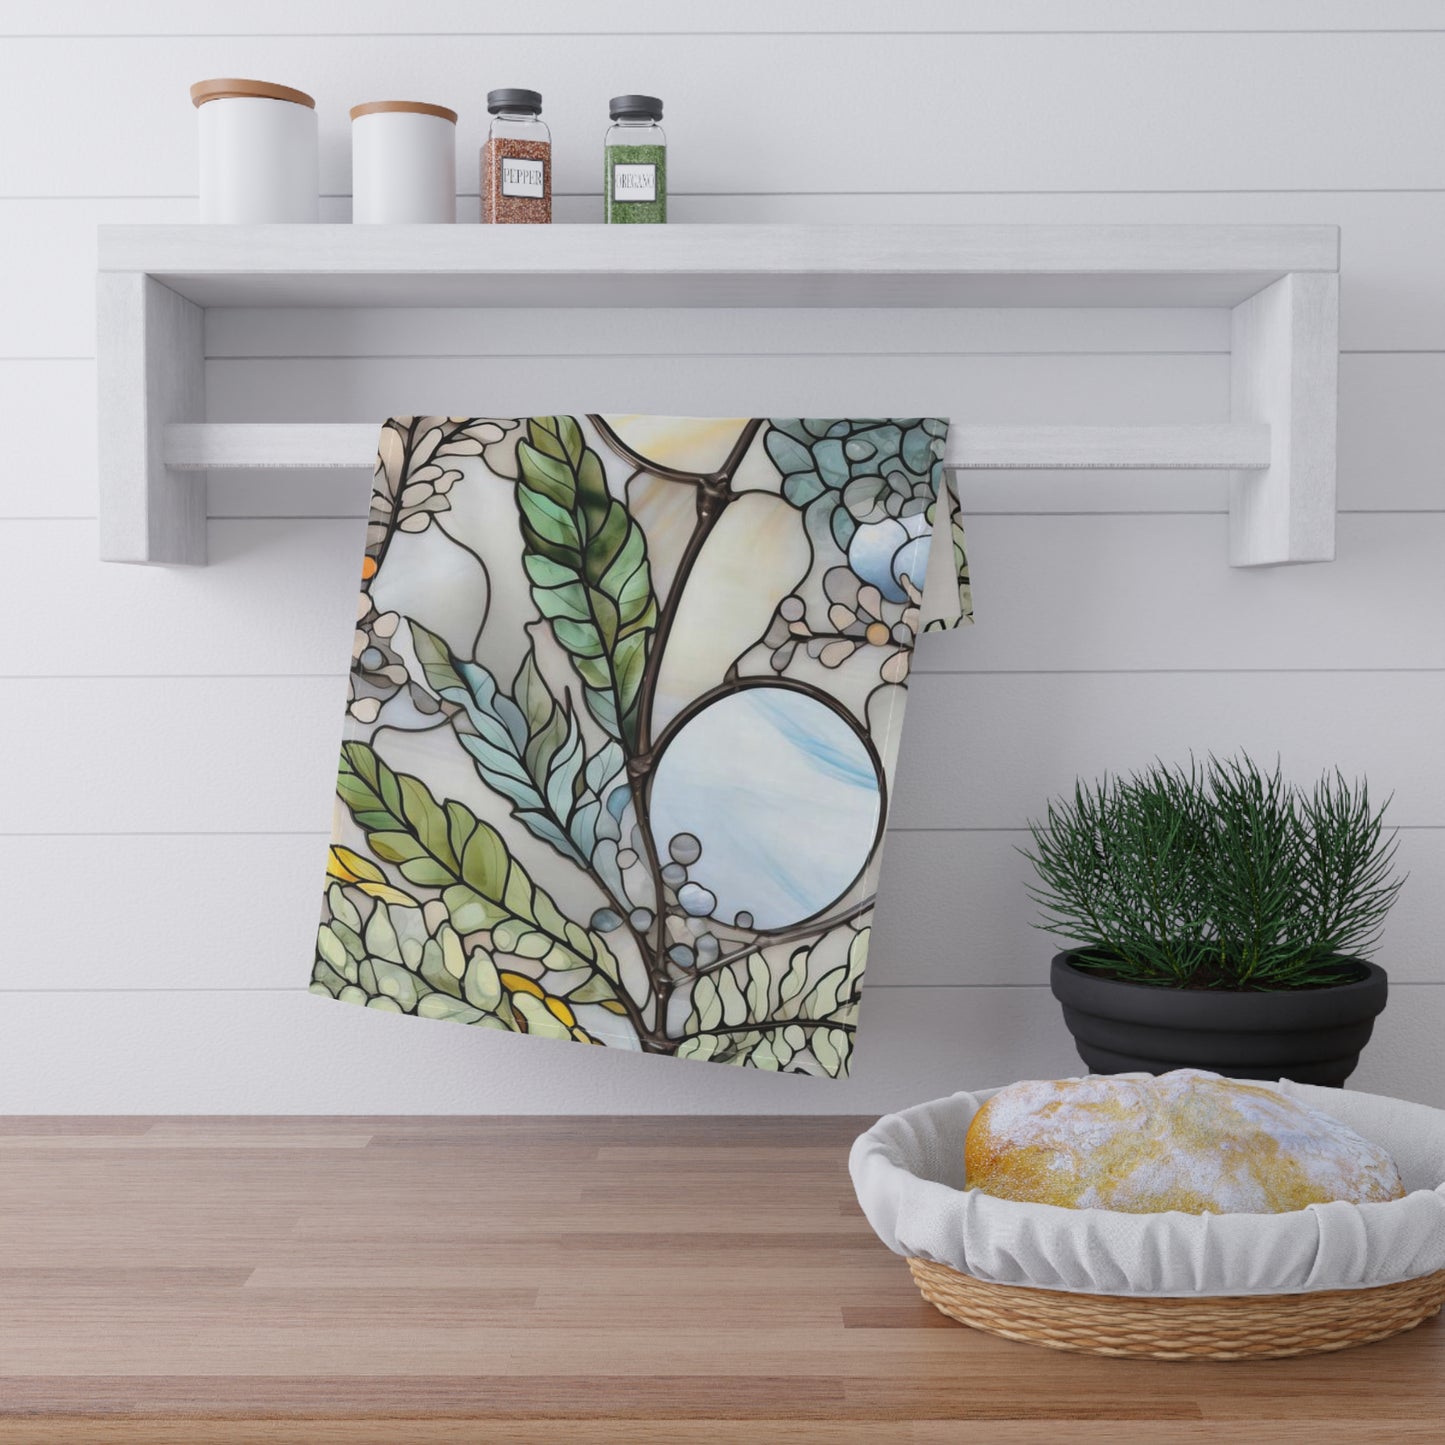 Stained Glass Ferns Kitchen Towel - 18x30"